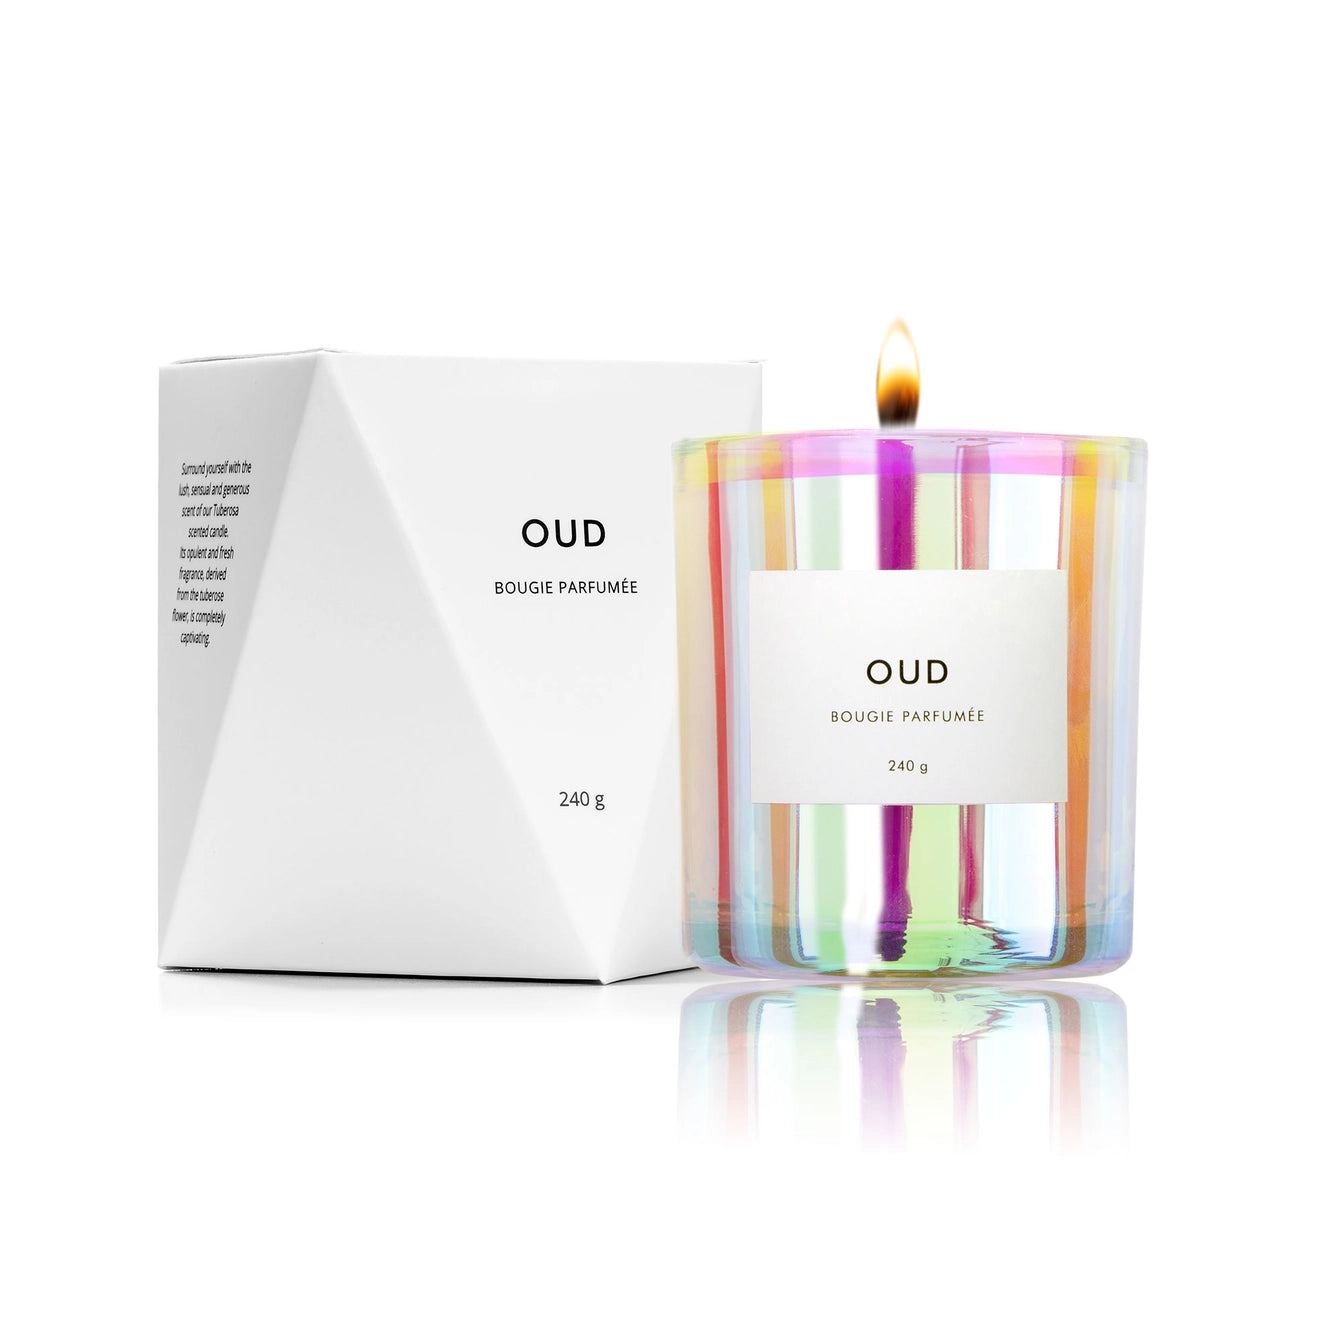 Les Citadines Oud Scented Candle